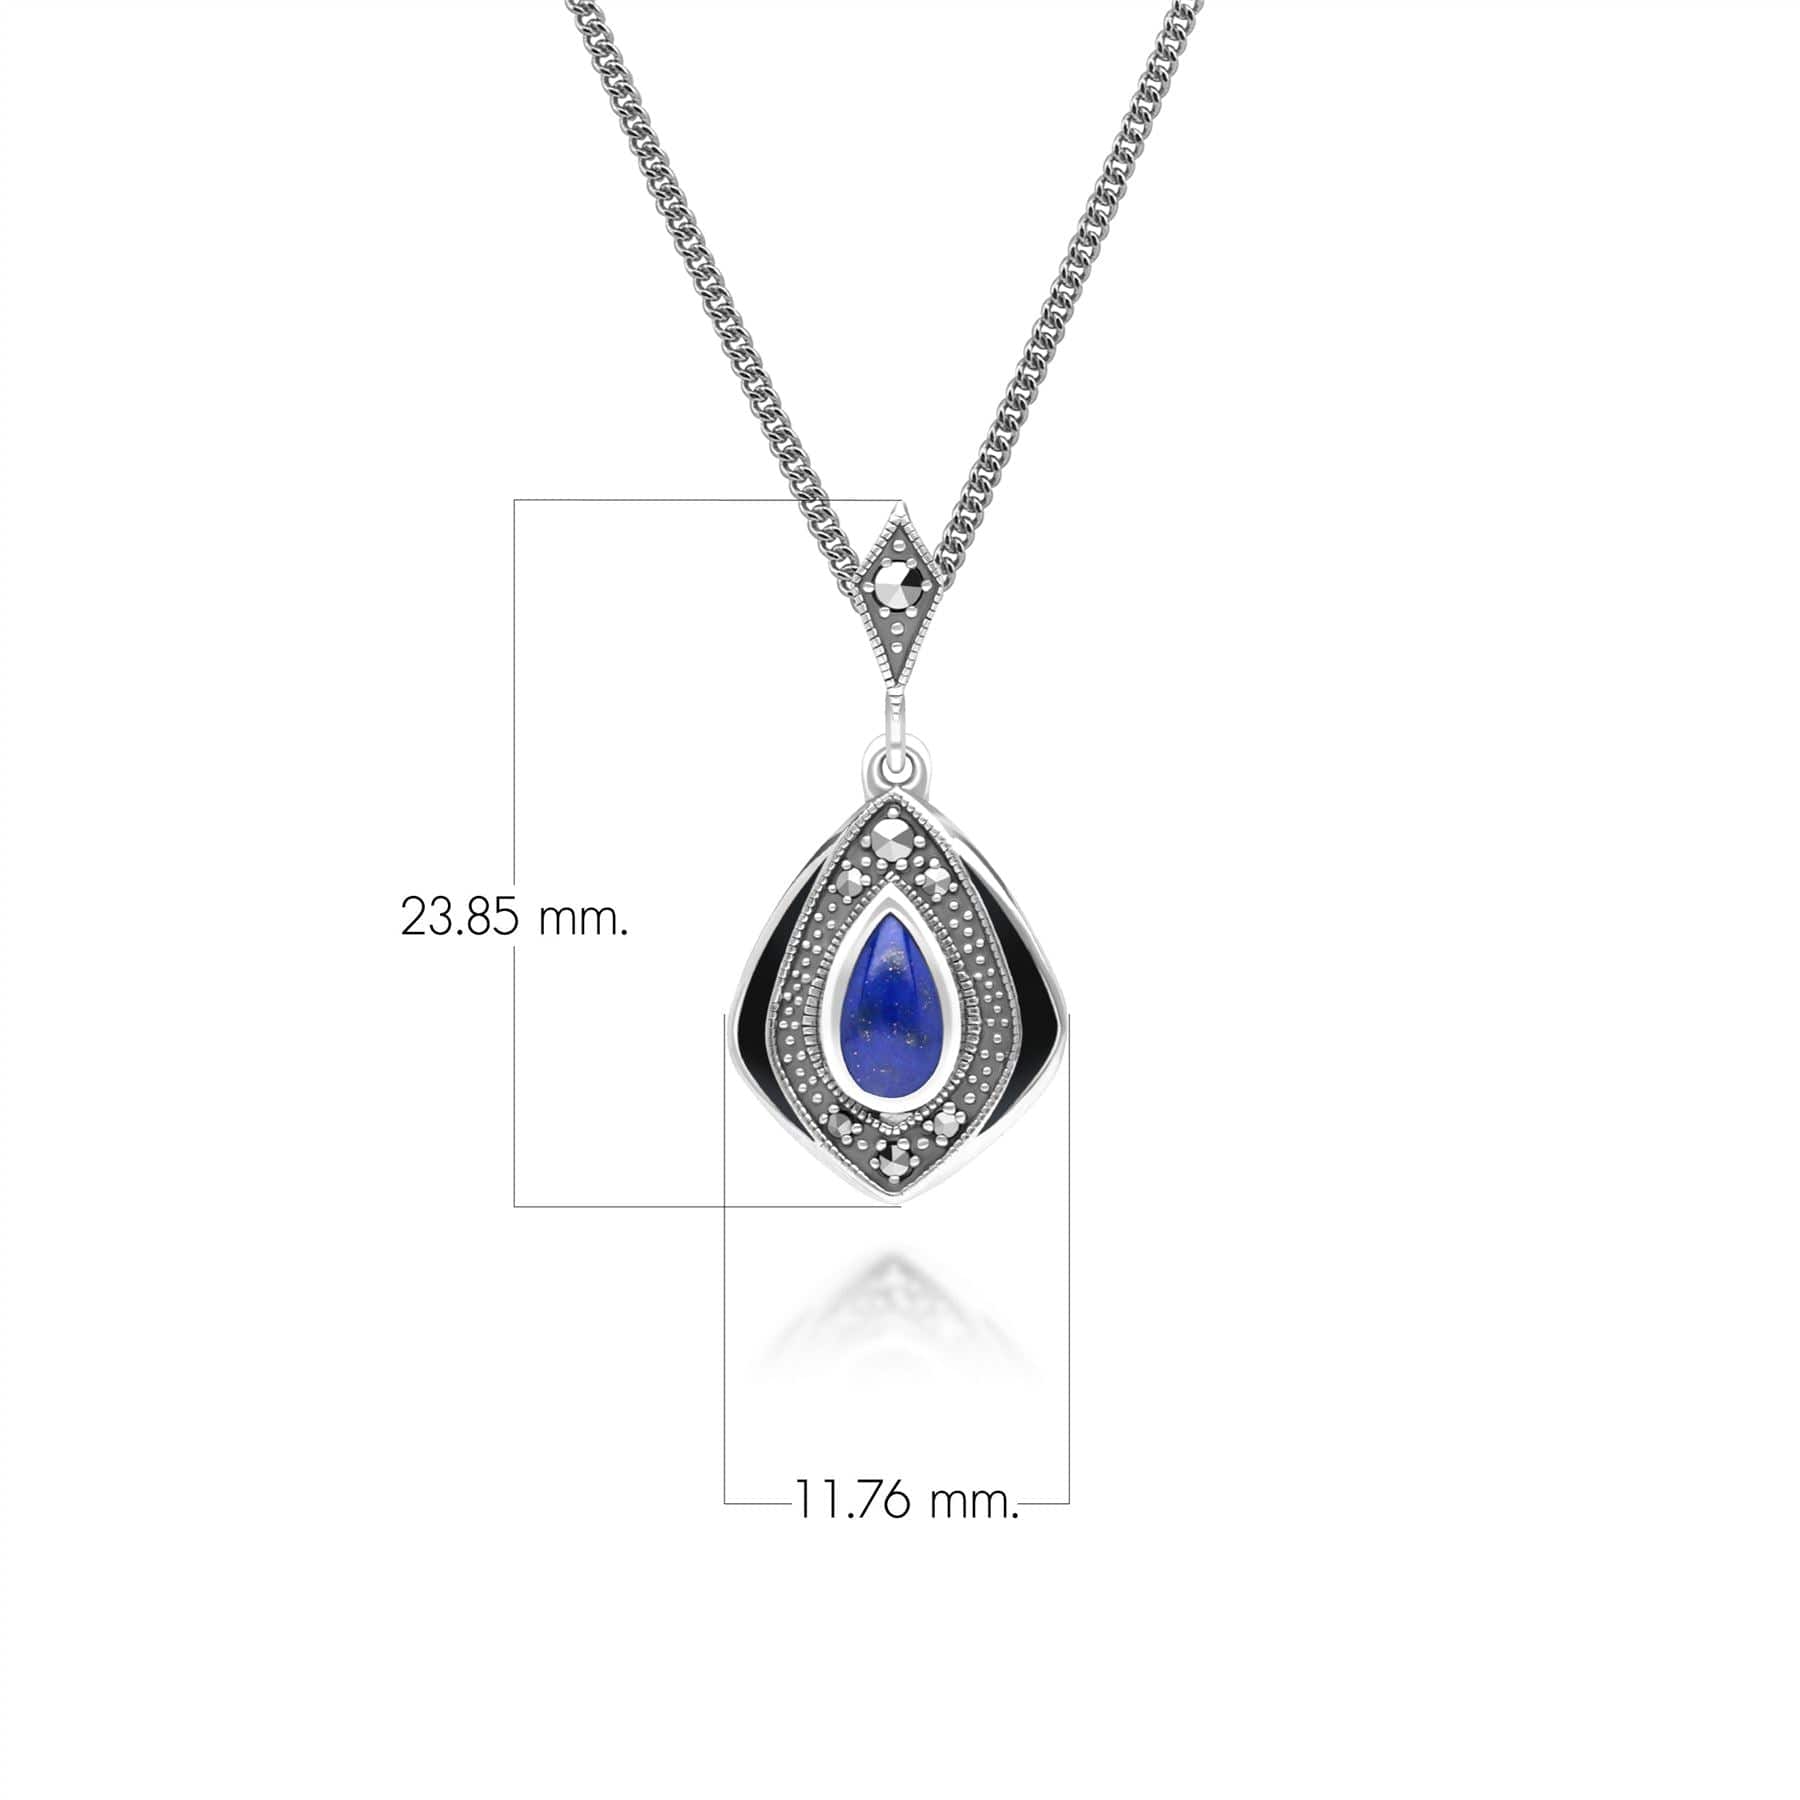 Art Deco Style Kite Lapis Lazuli and Marcasite Pendant Necklace in Sterling Silver 214P334102925 Dimensions